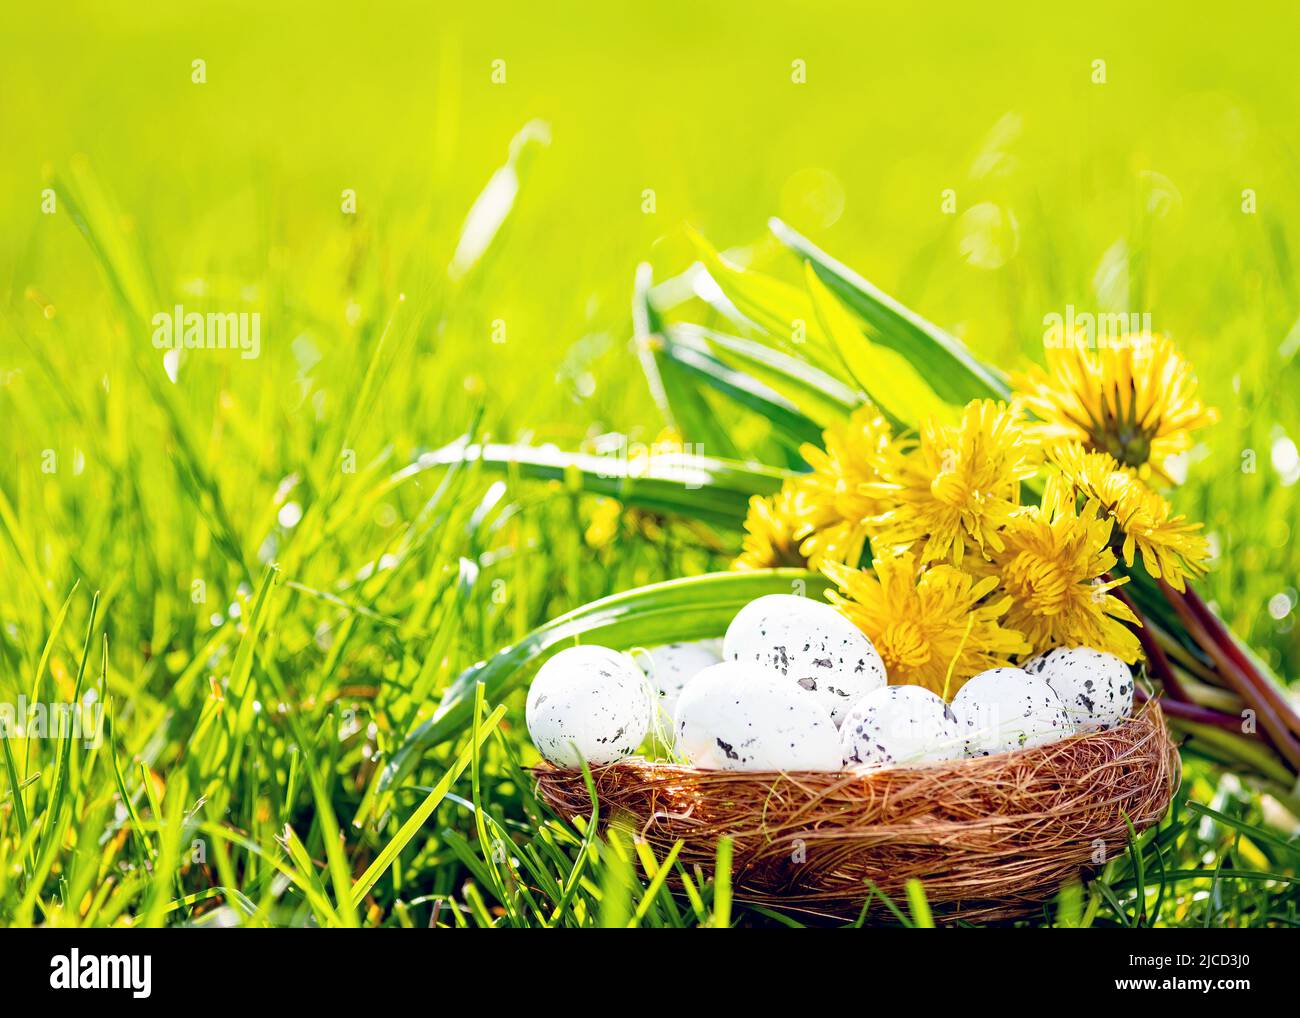 Easter background with eggs, green grass and dandelions Stock Photo